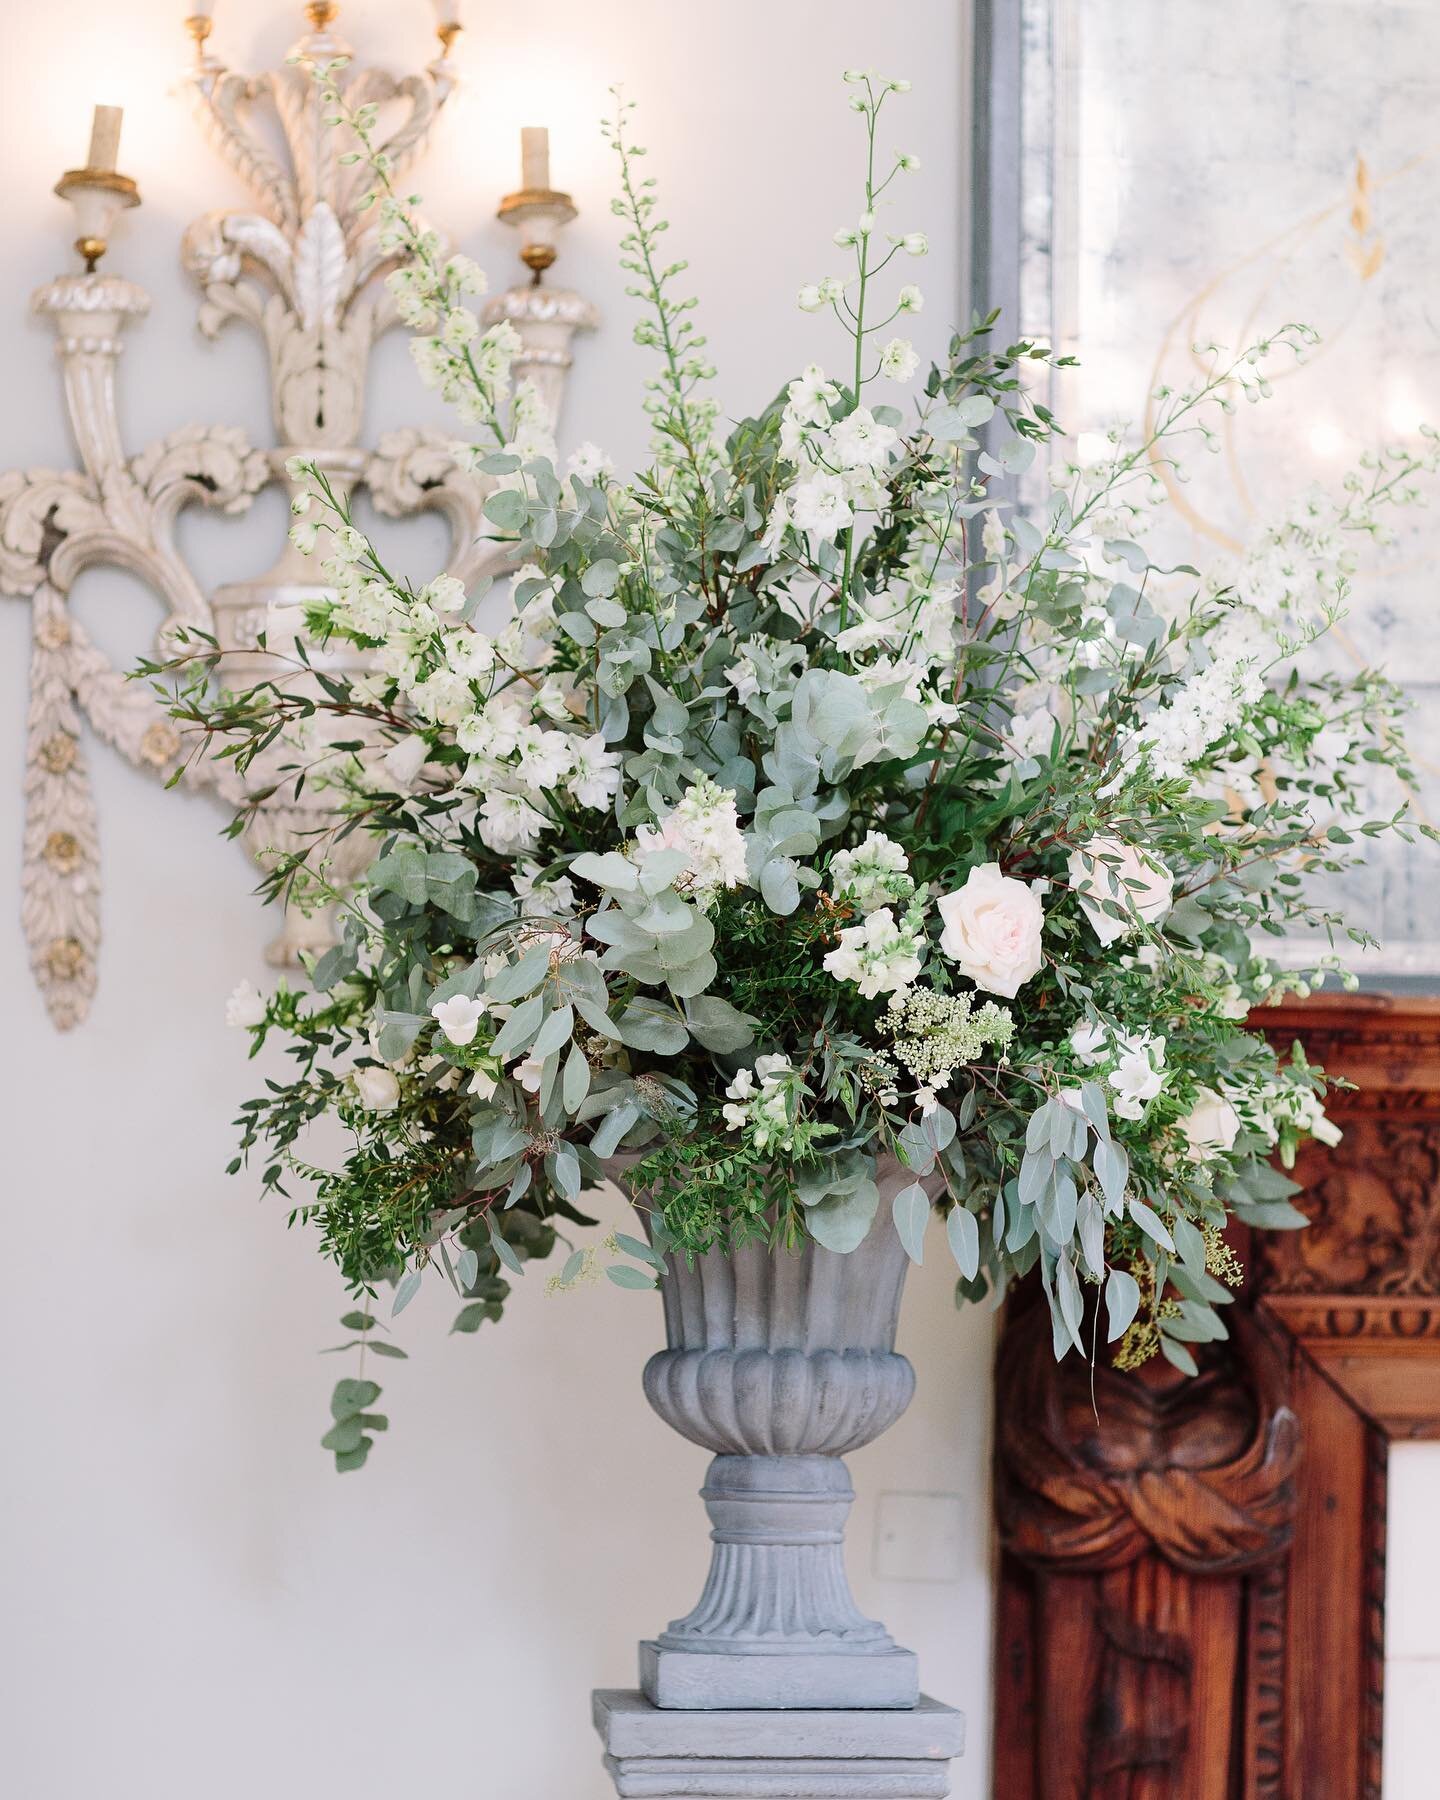 🌿Urn arrangements🌿

The importance of flowers to make each wedding beautiful, yet unique. A stunning floral filled urn for an outdoor ceremony and repurposed for reception. Where possible, we are always trying to reuse florals throughout the day. 
